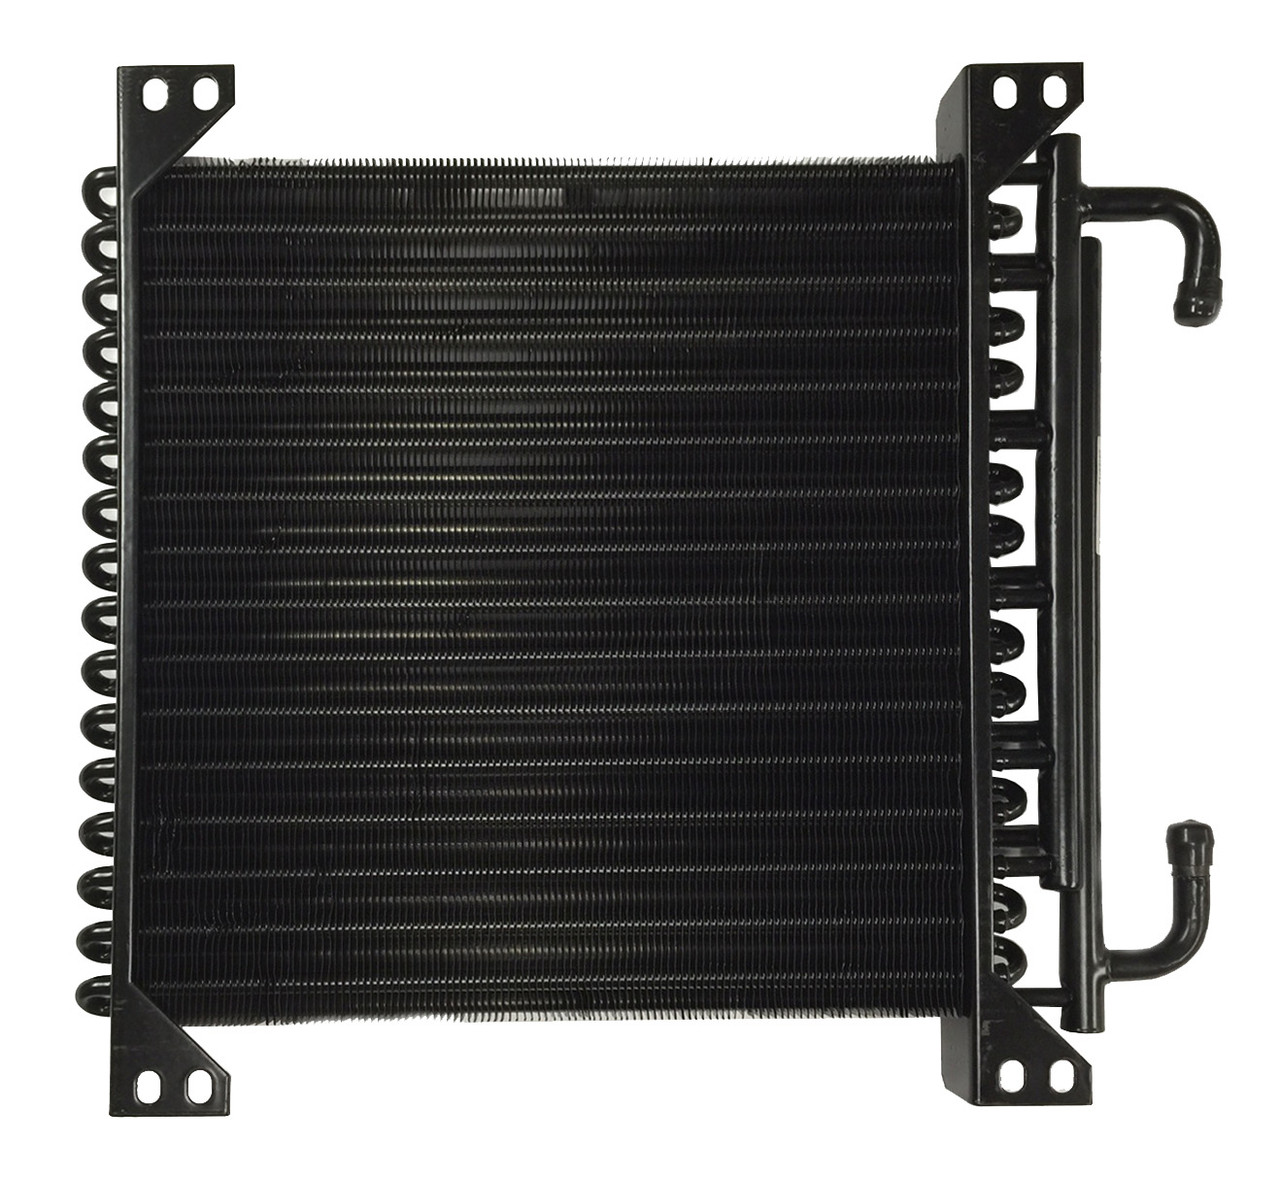 Oil Cooler for Case IH DX35, DX40, DX45, Farmall 40, 40B, 45, 45B replaces  87344149 (21174)